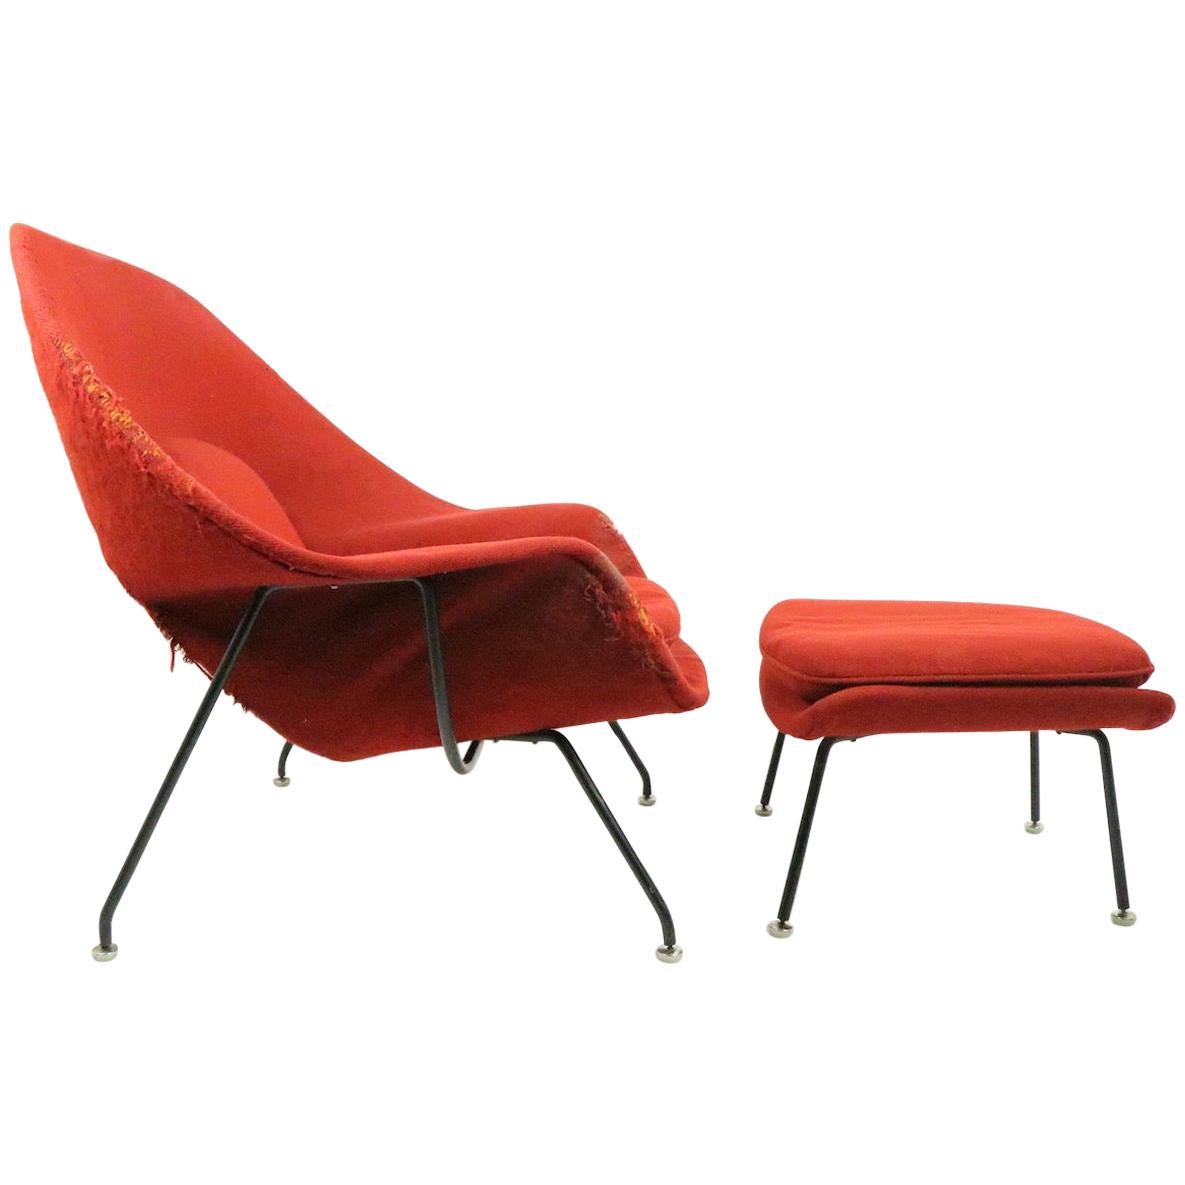 Womb Chair and Ottoman by Saarinen for Knoll